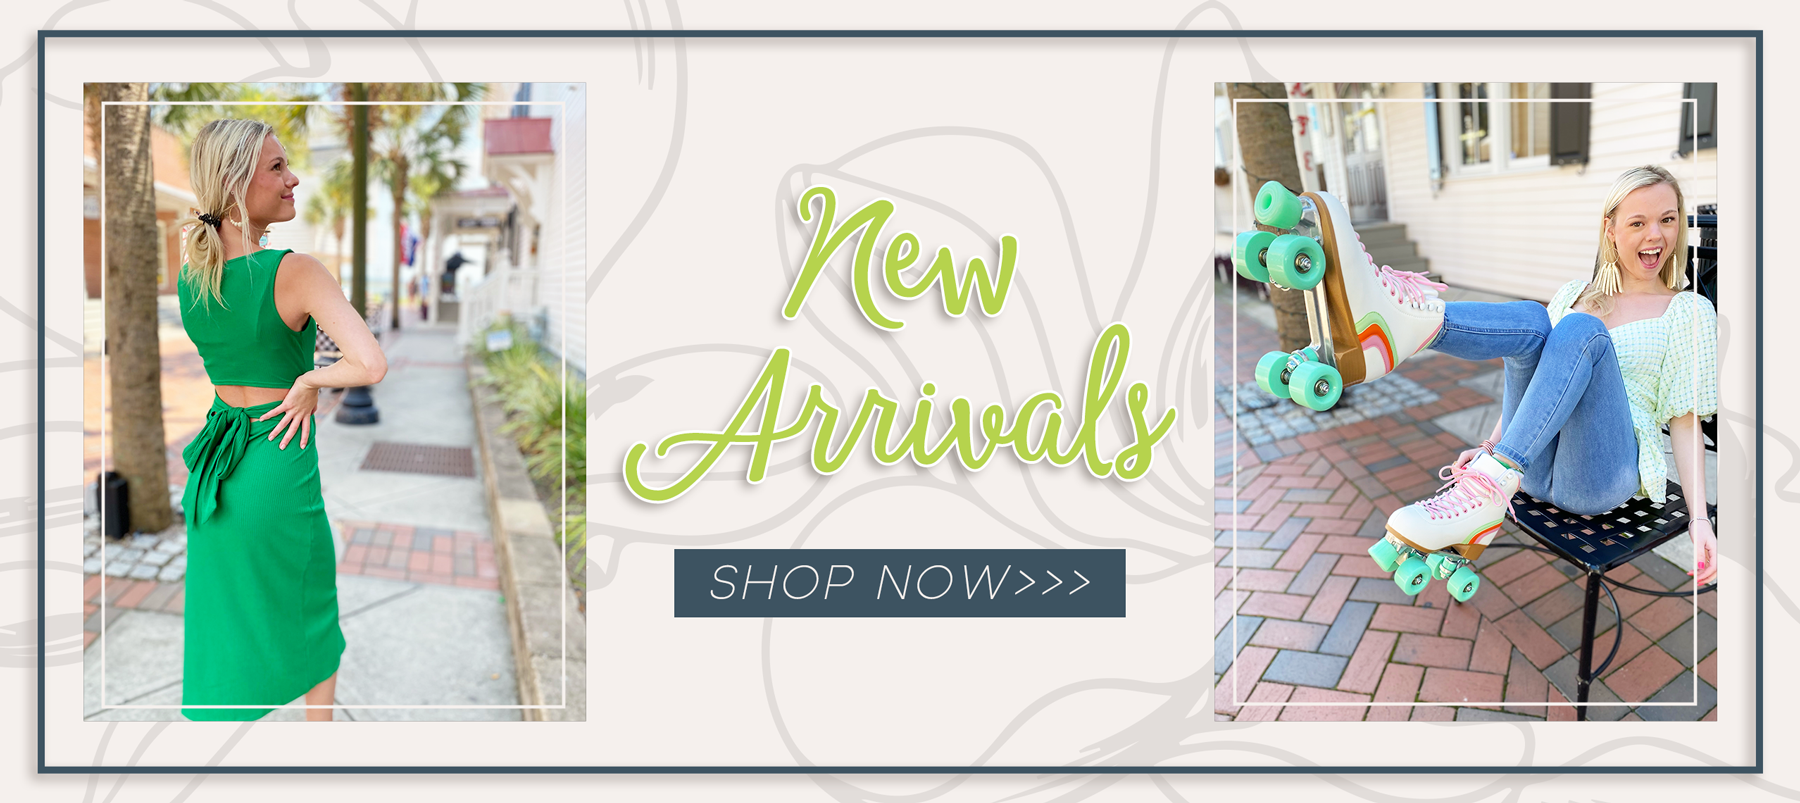 New Arrivals of women's clothing at SugarBelle